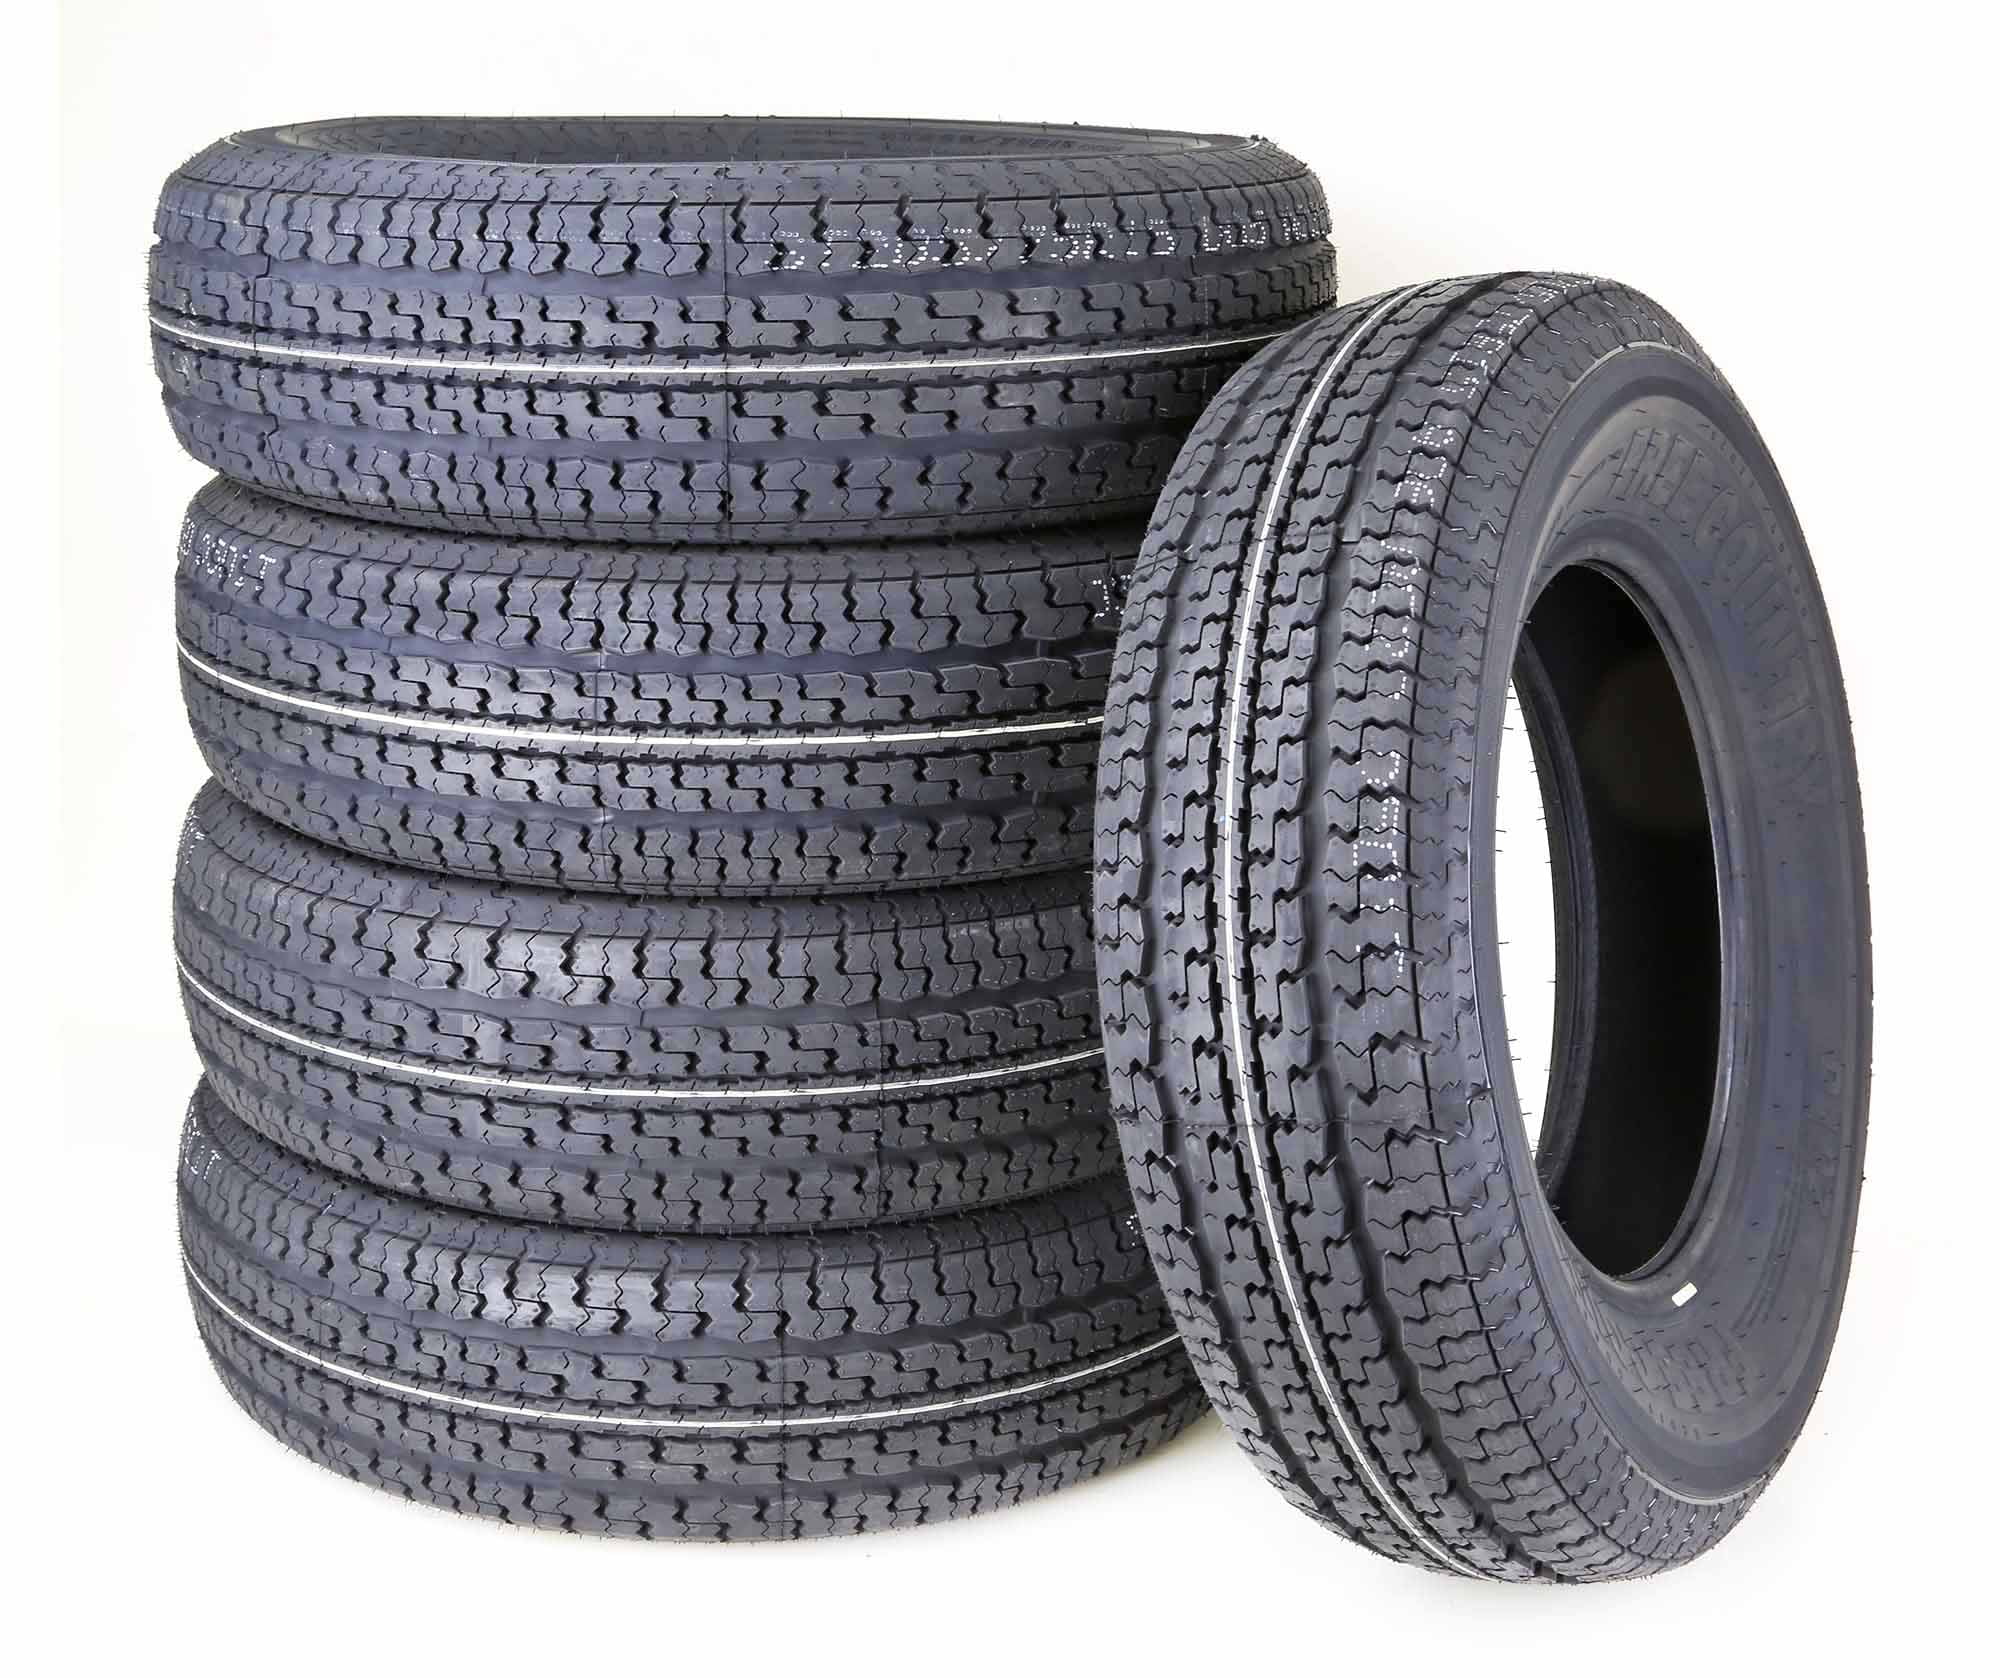 5 Heavy Duty FREE COUNTRY Trailer Tires ST205/75R15 10PR Load Range E Steel Belted Radial w/Scuff Guard 